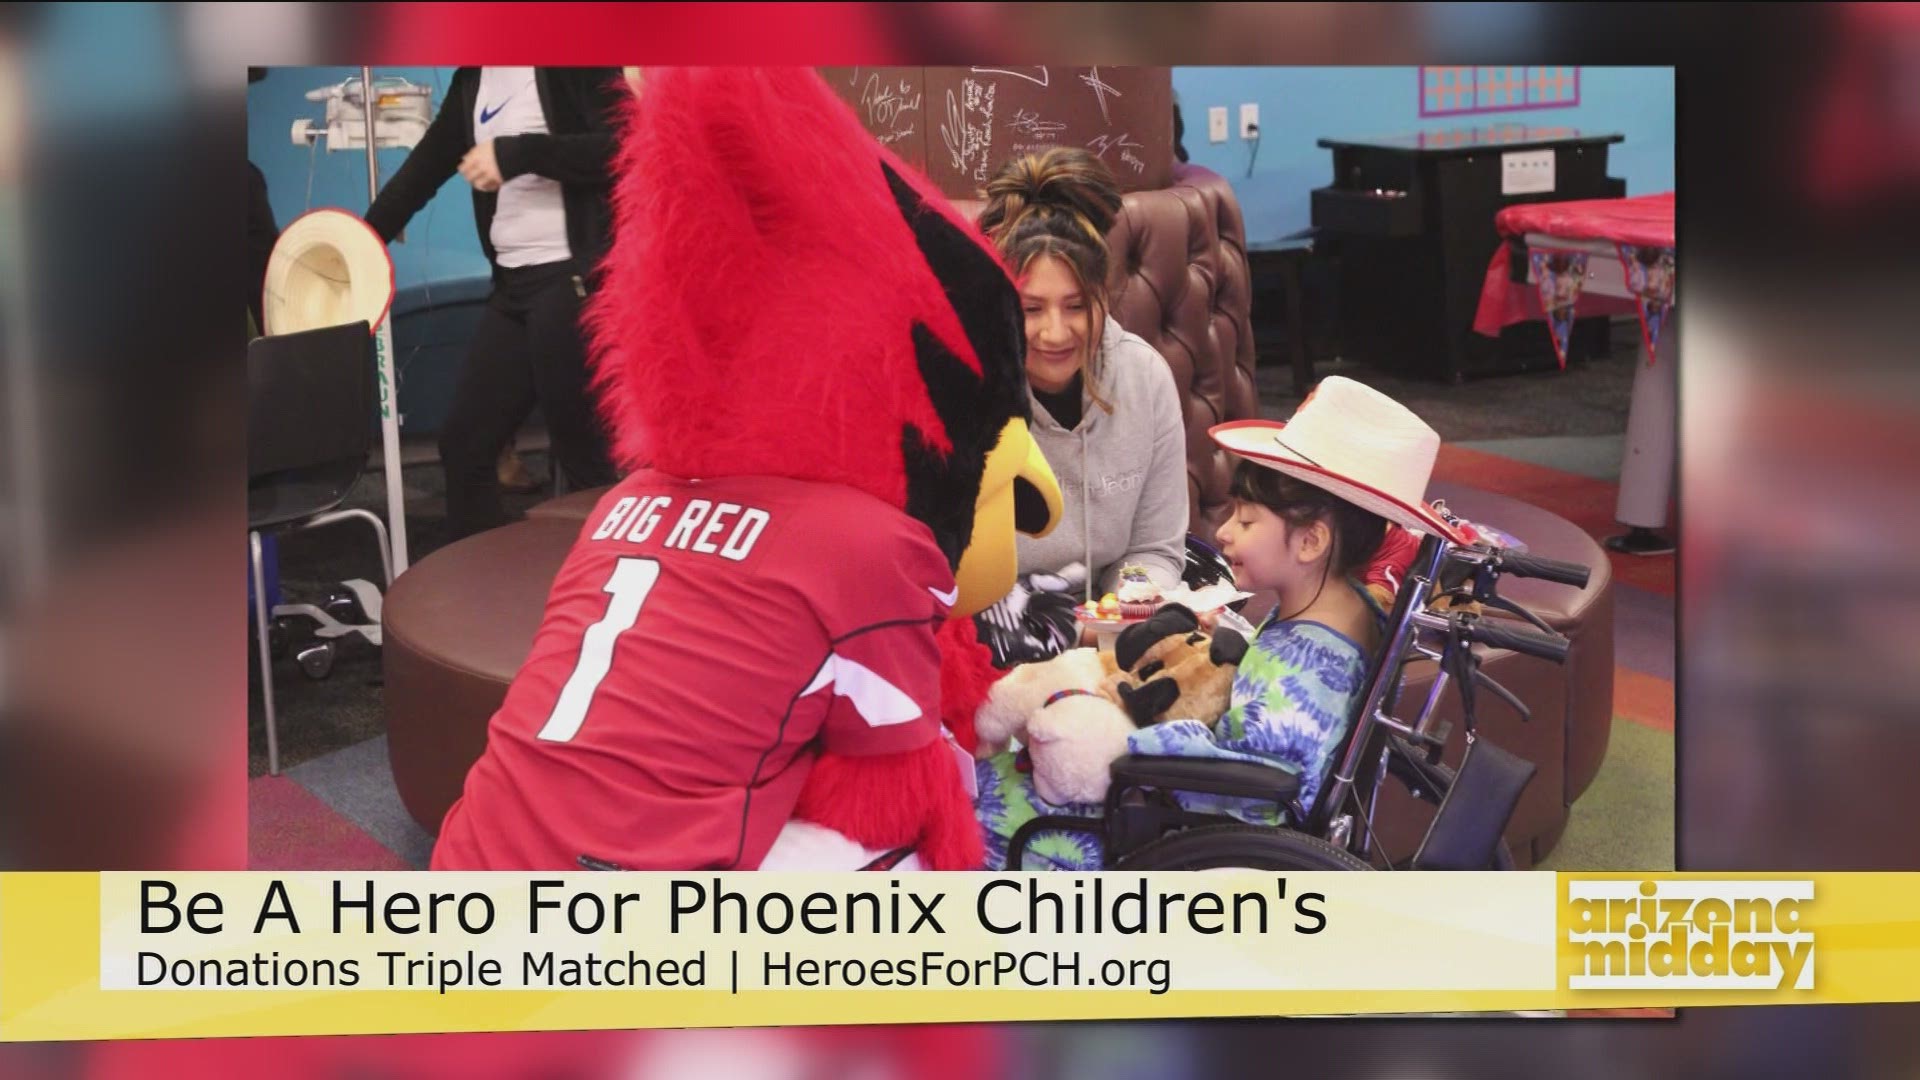 Nicole Bidwell, Co-Owner of the Arizona Cardinals, tells us how the Cards Players are helping children plus how you can help support the hospital on Giving Tuesday